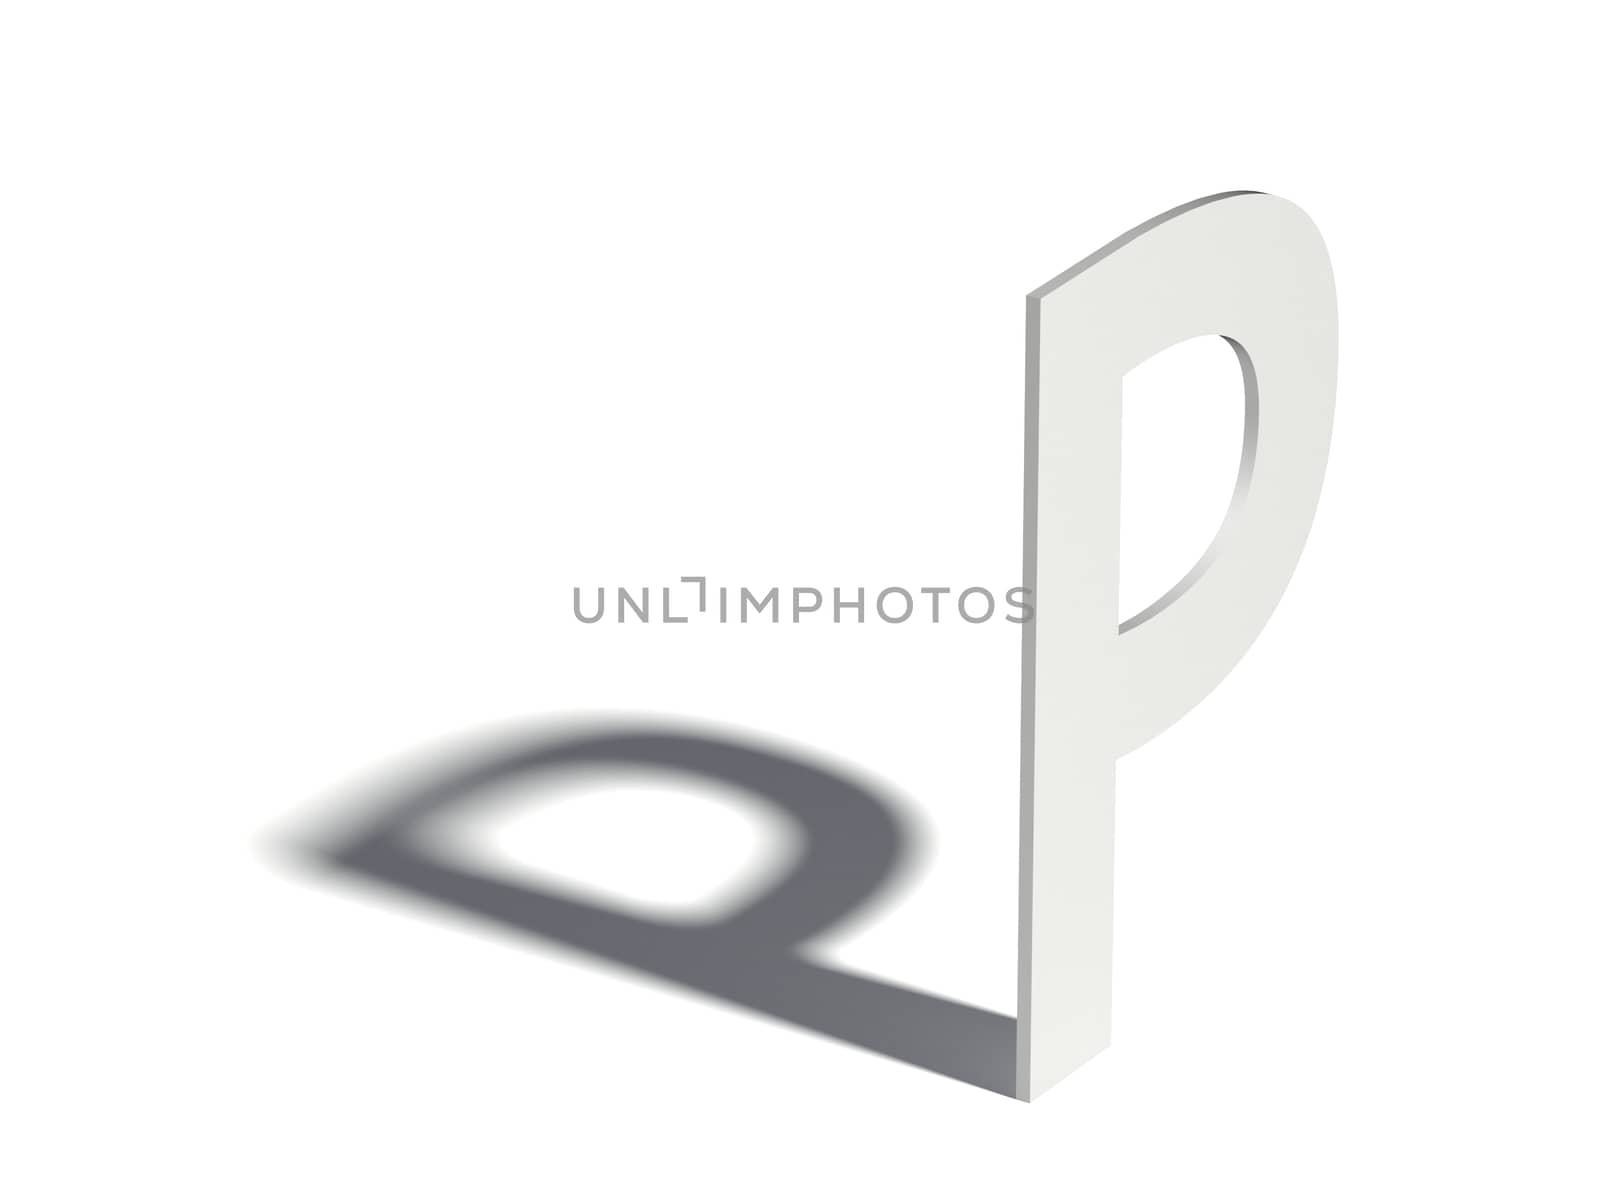 Drop shadow font. Letter P. 3D render illustration isolated on white background